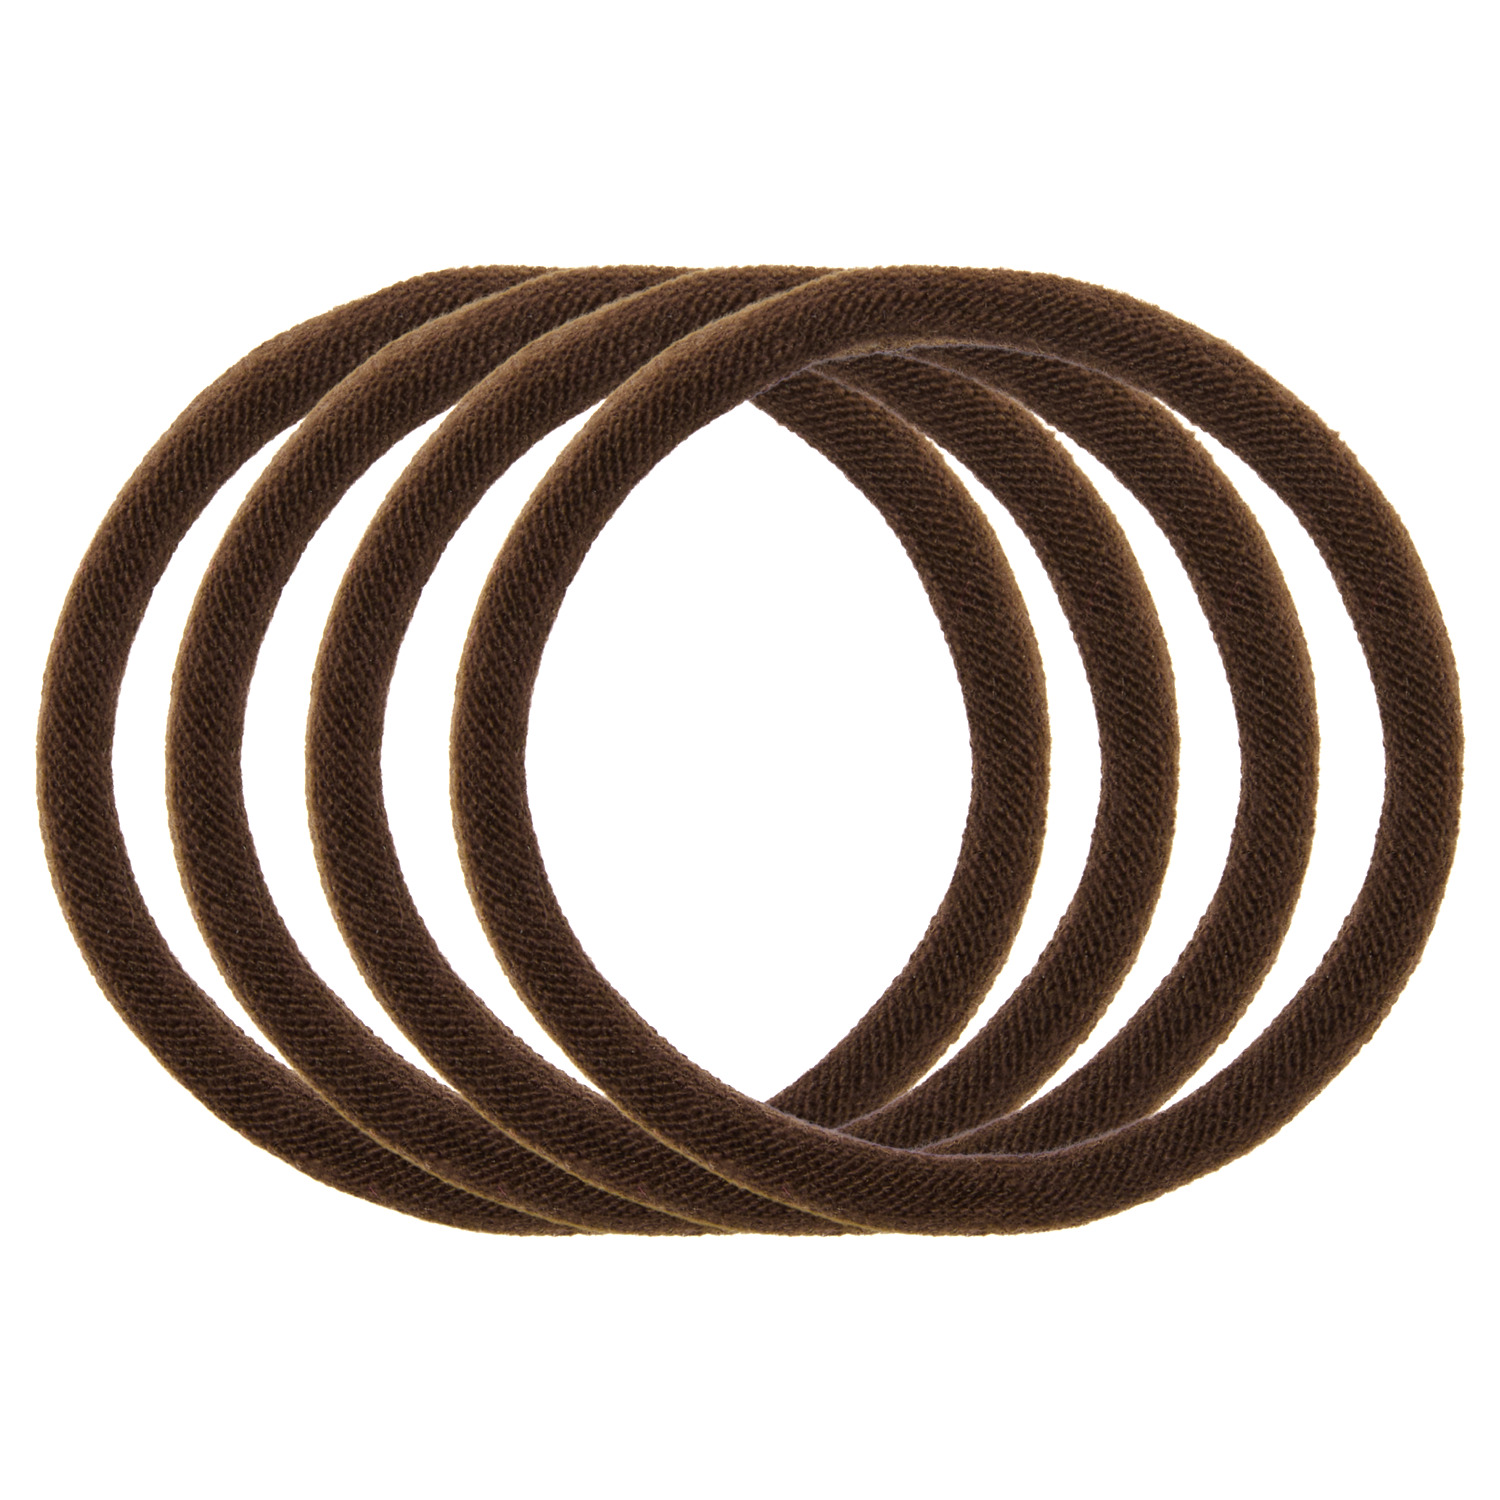 Roll-up hair elastic soy/cotton brown, 4 pieces